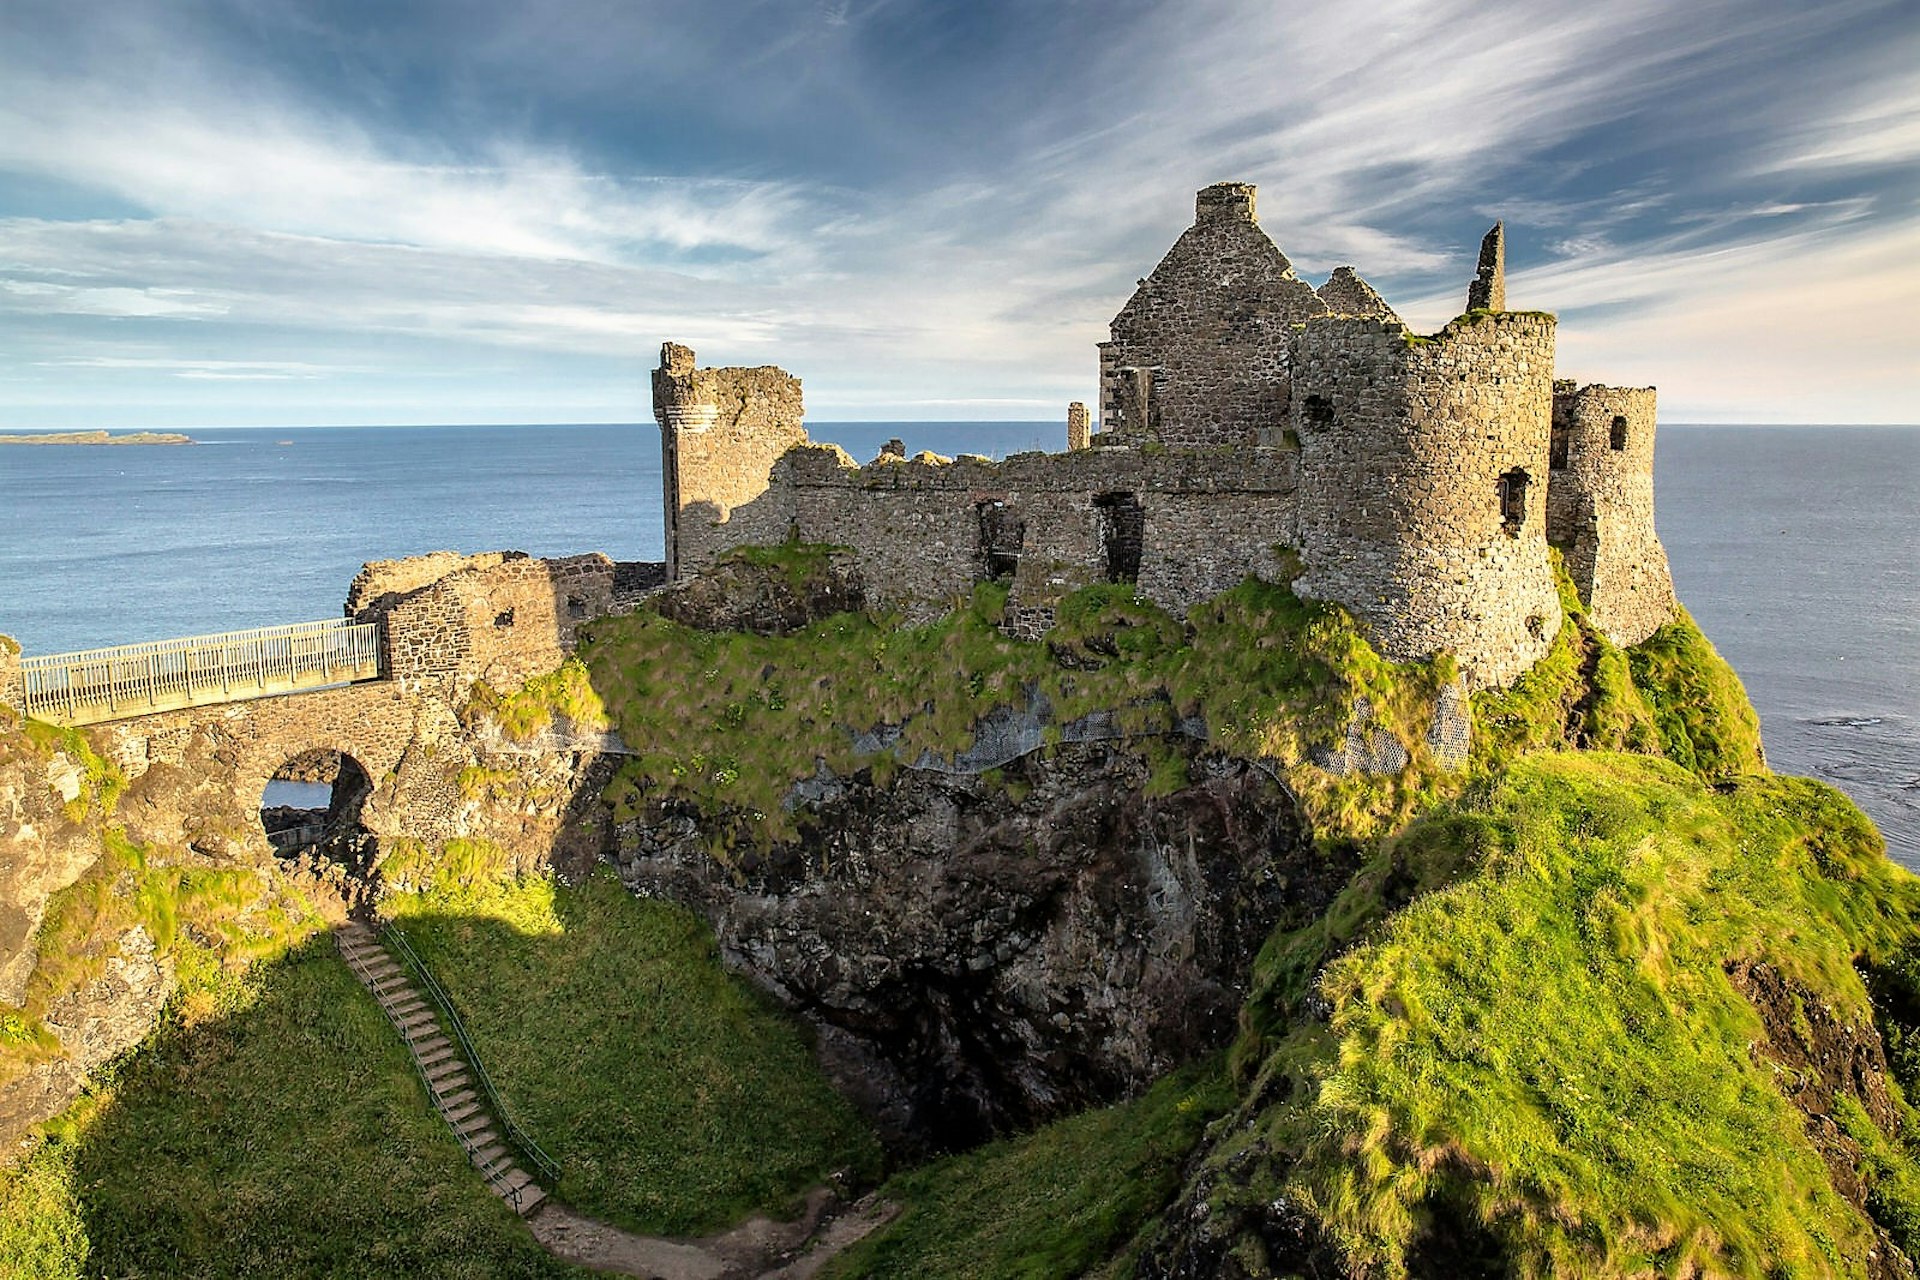 Bushmill's whiskey might be old, but Dunluce Castle has an even longer past © Rainbow79 / Getty Images / iStockphoto